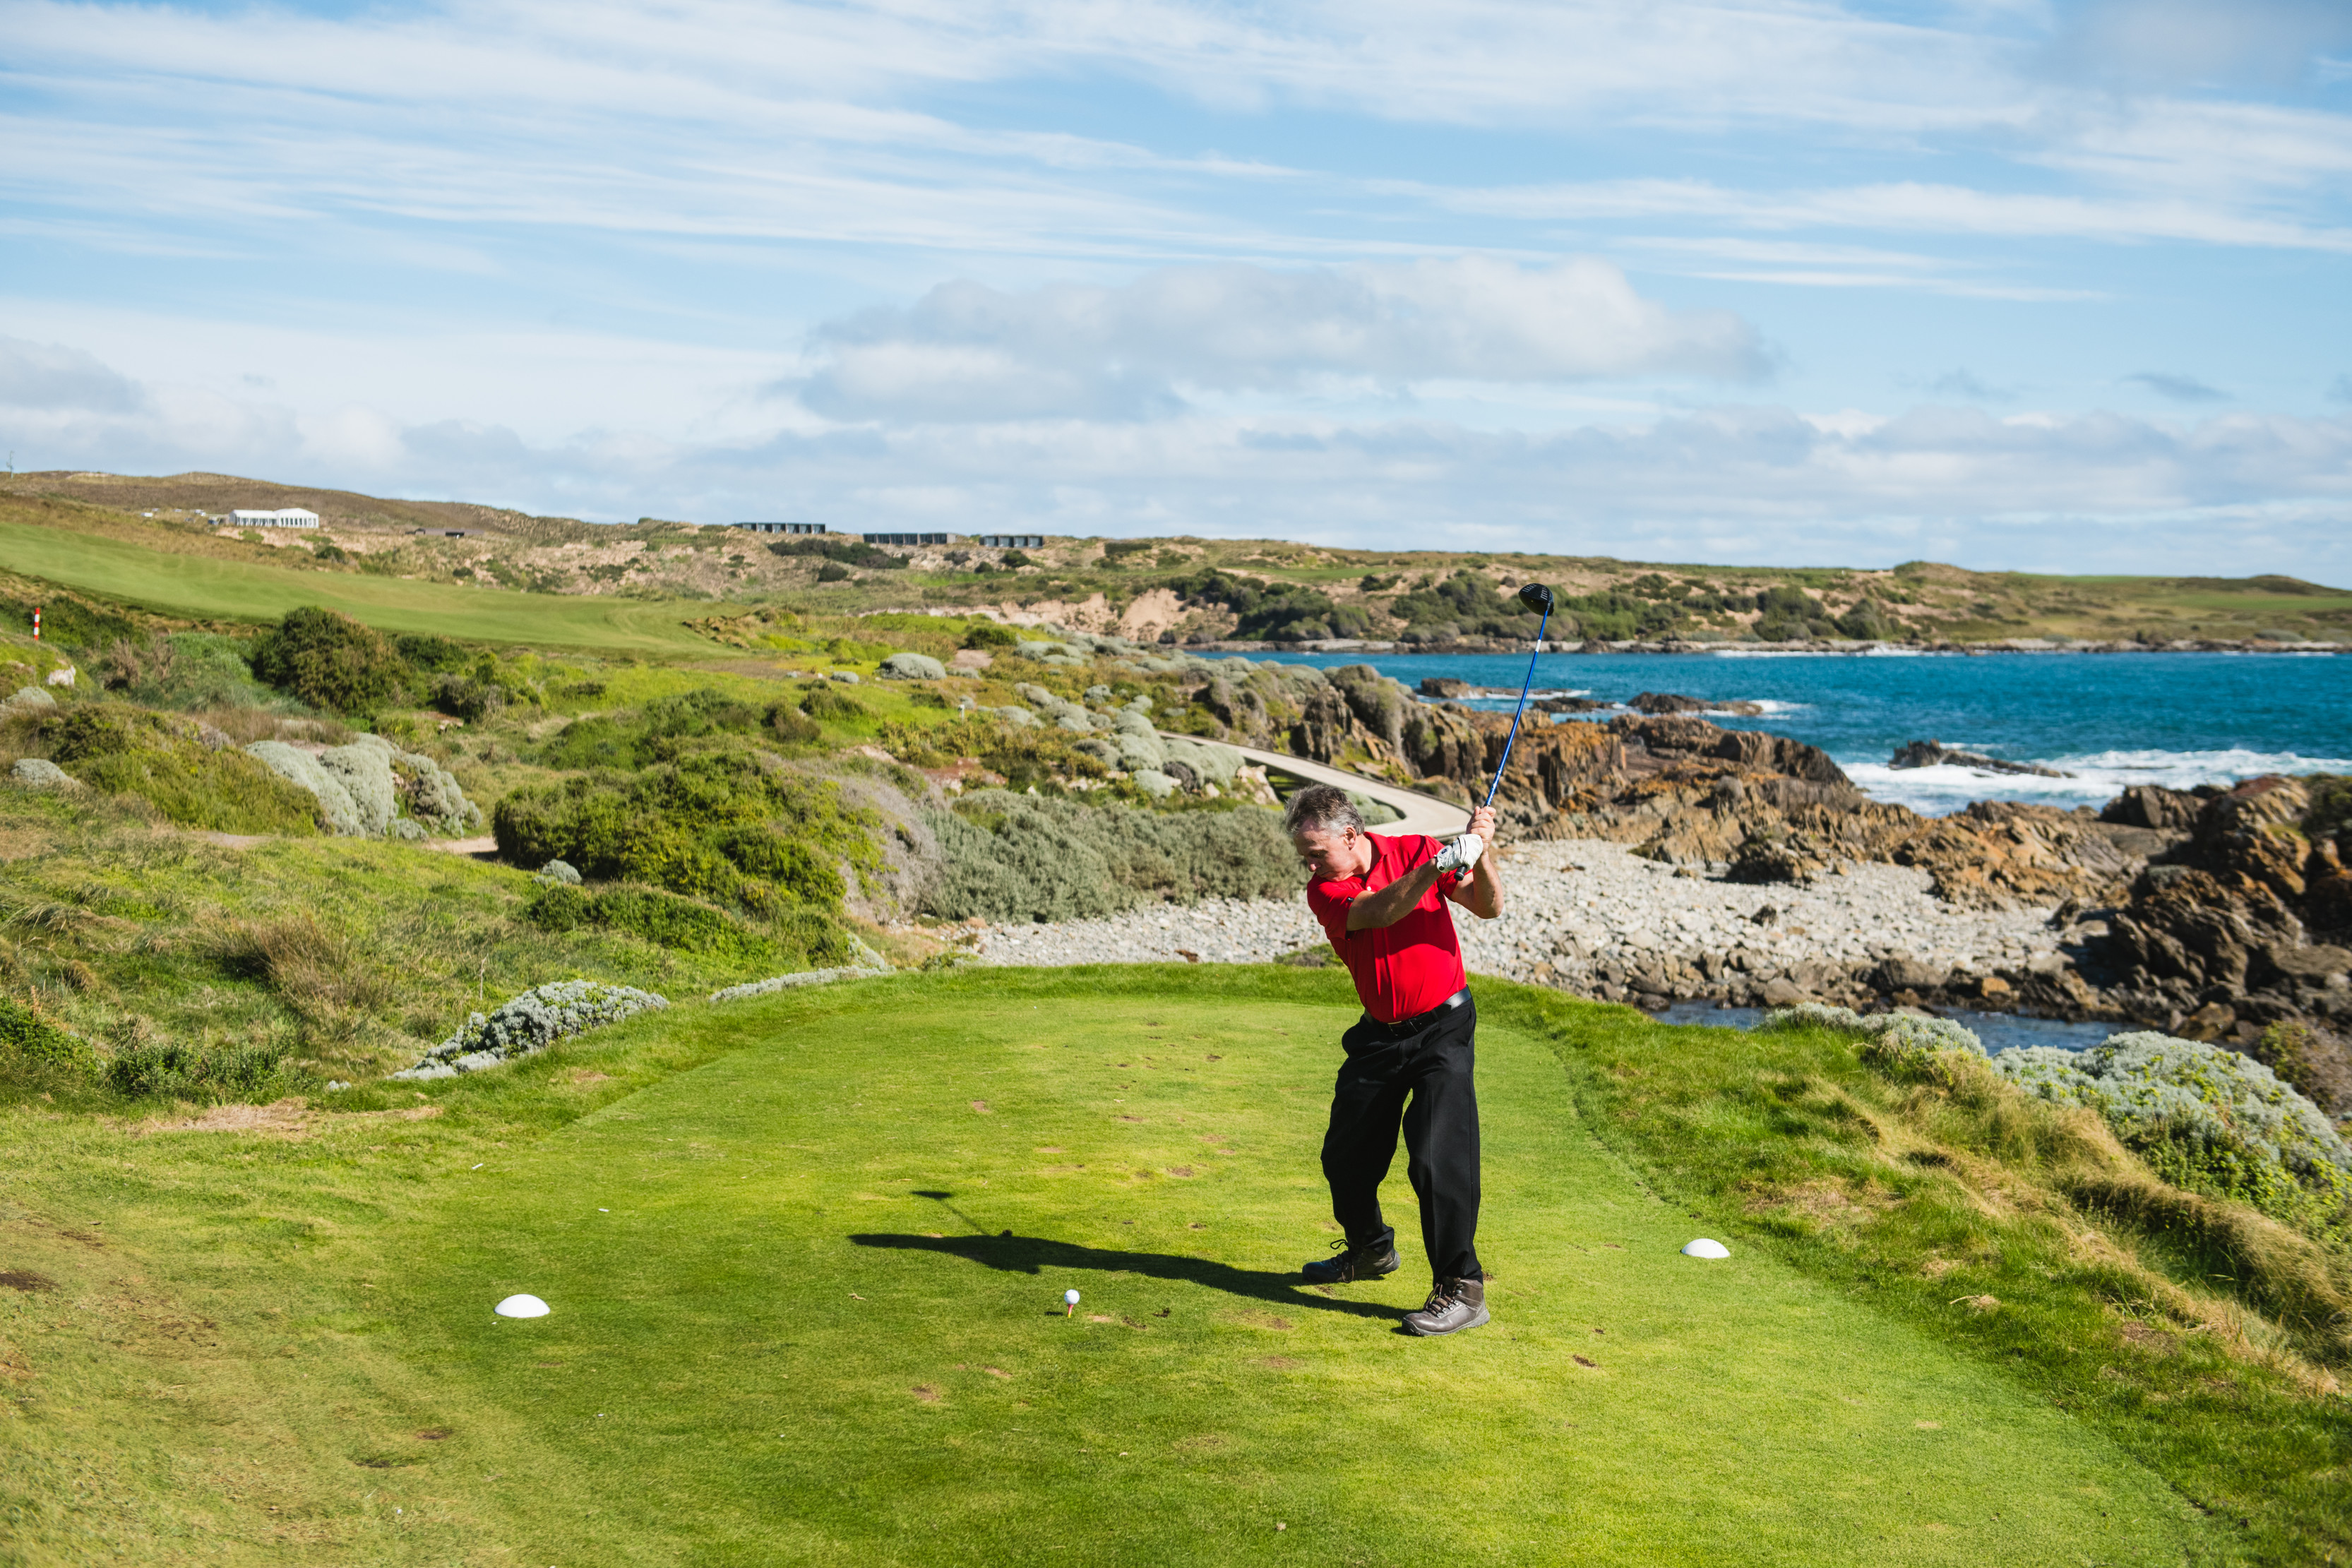 A man swings his golf club at Cape Wickham Golf Course, with lush green landscapes and ocean in the background.